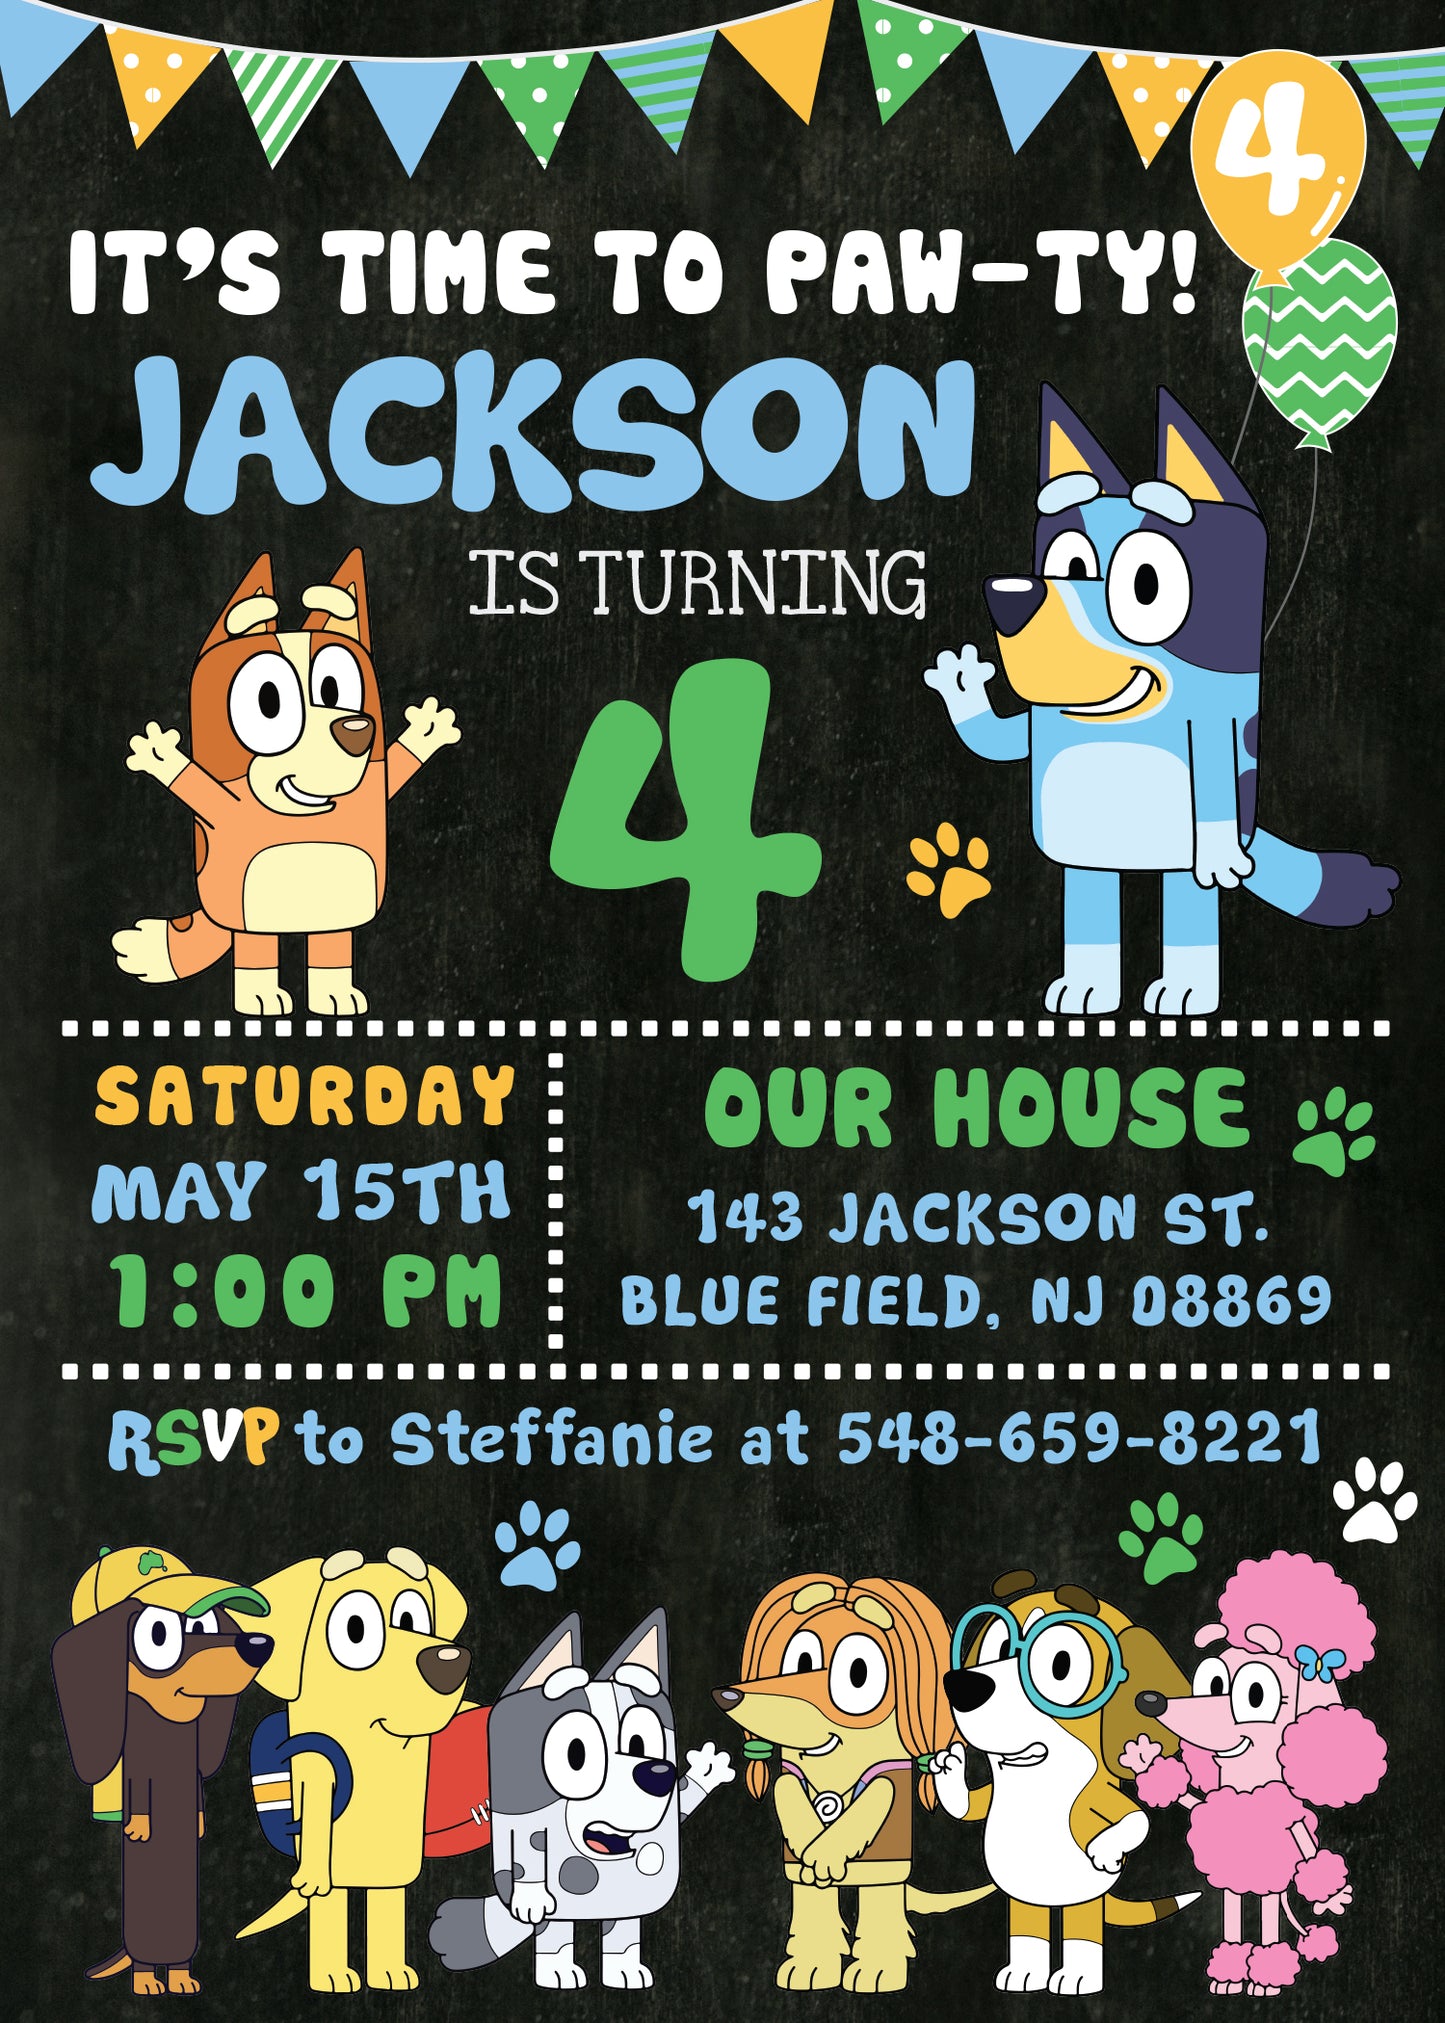 Boy BLUEY Birthday Party Invitation with or without Photo - Printed or Digital File!